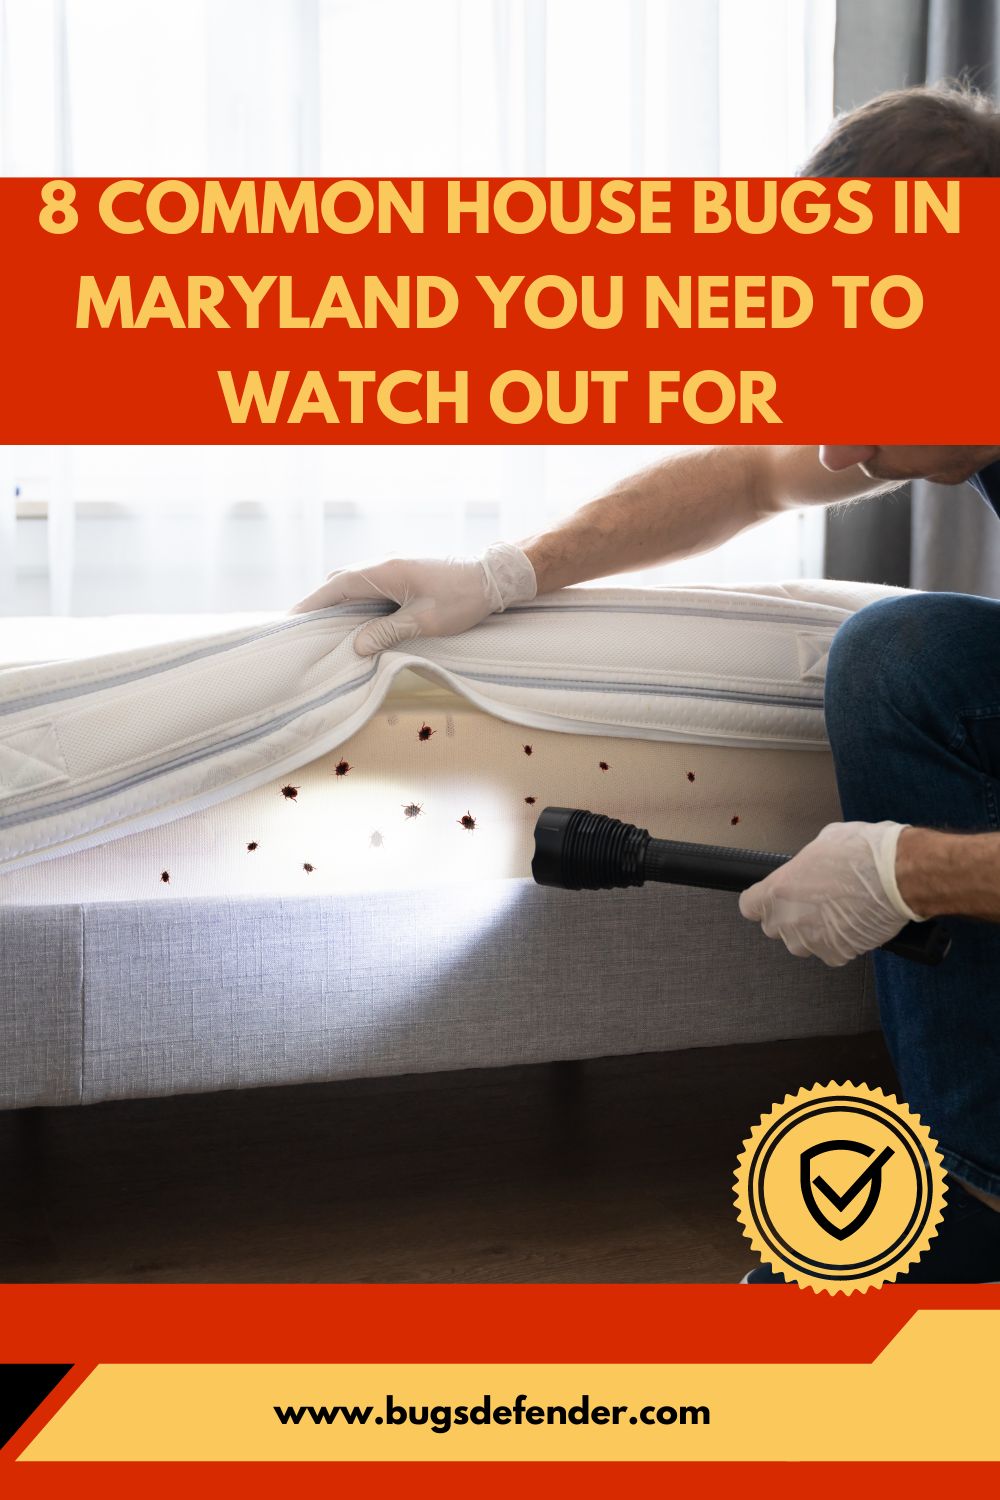 8 Common House Bugs In Maryland You Need To Watch Out For pin 2